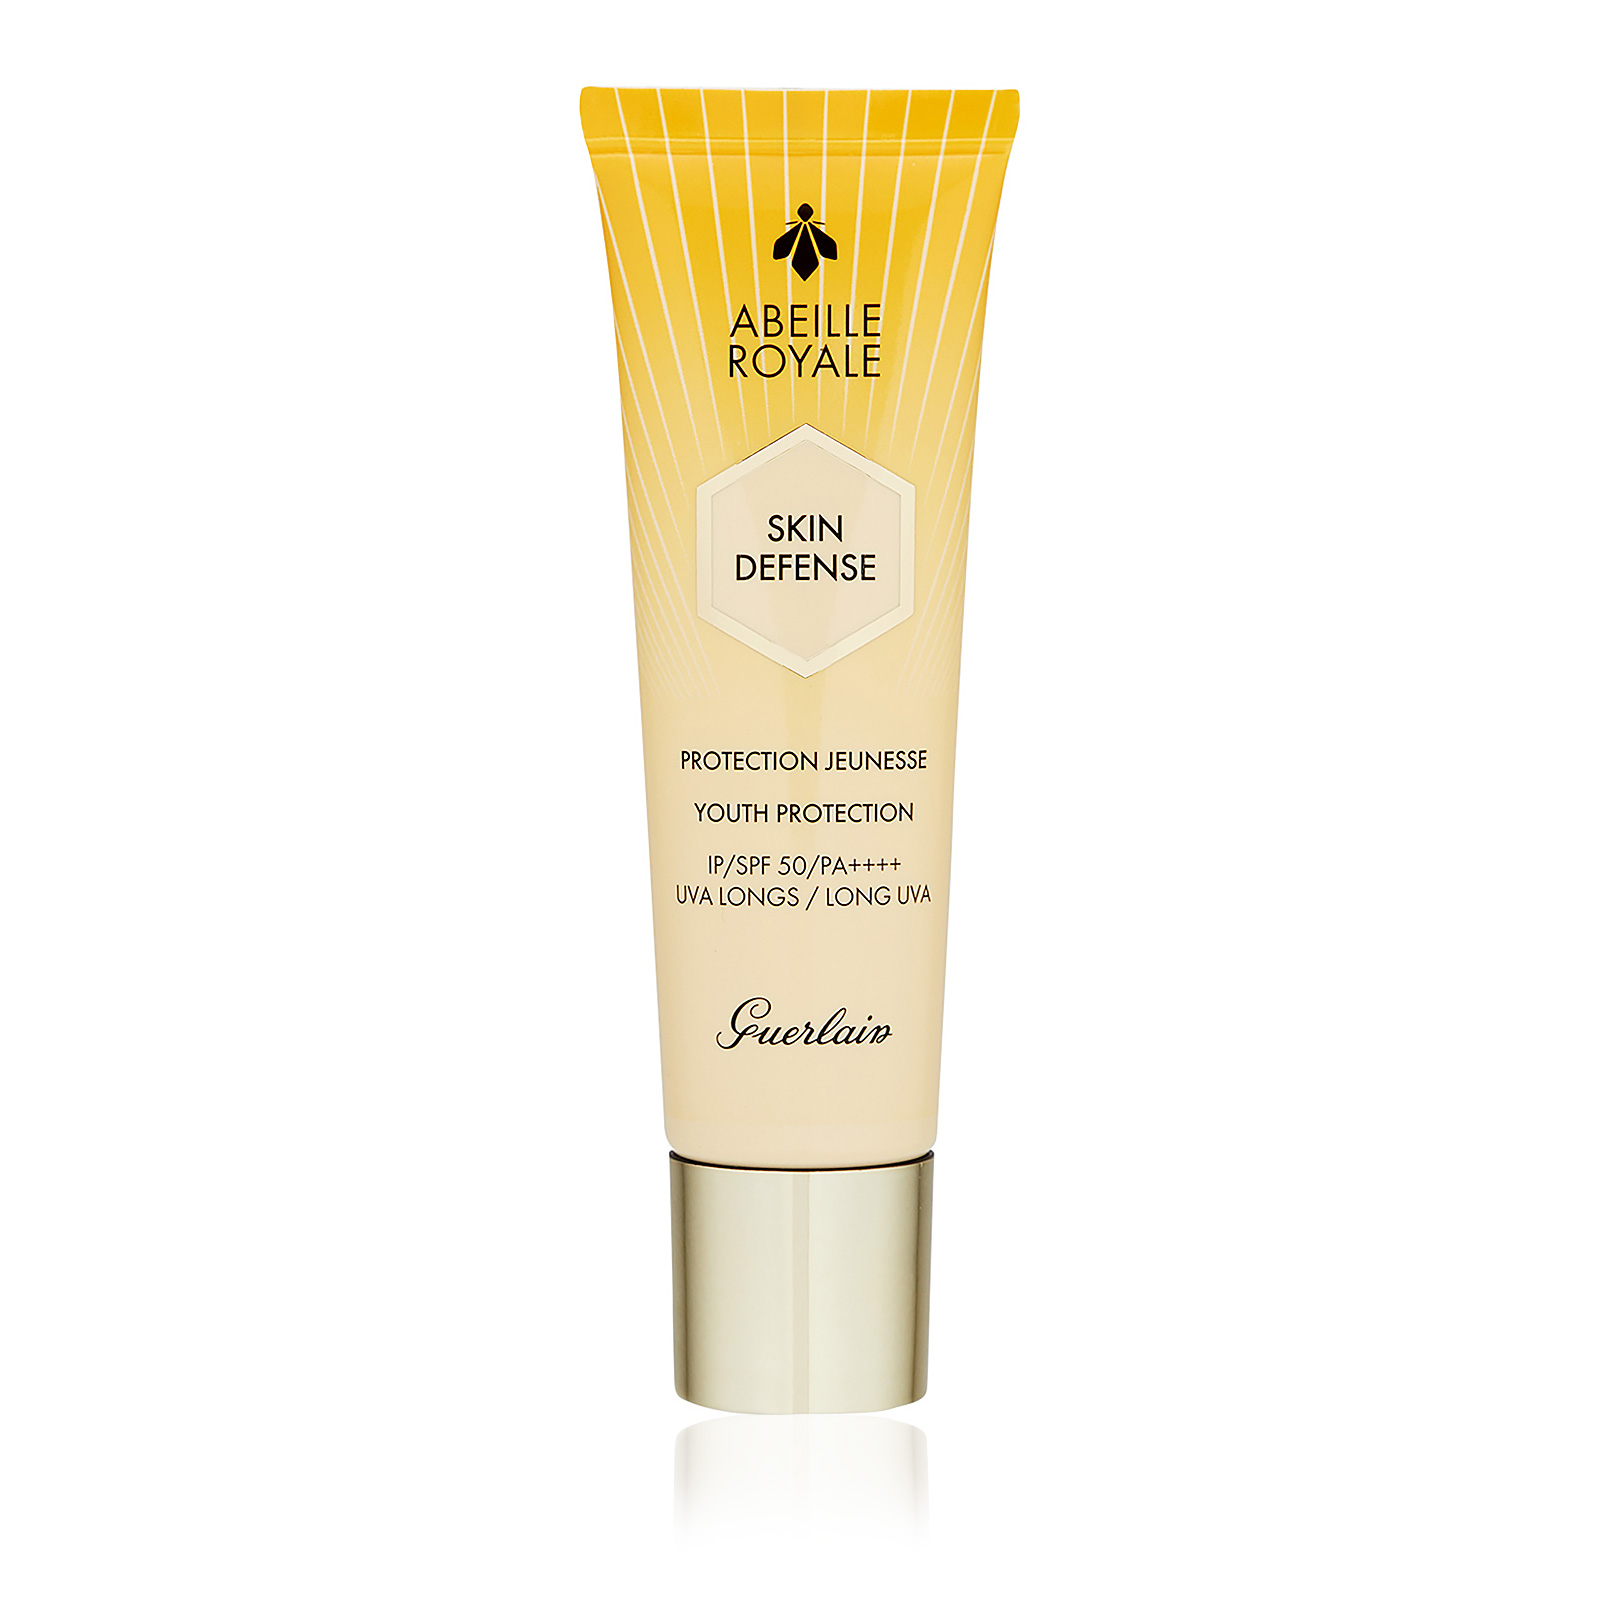 Abeille Royale Skin Defense Youth Protection SPF 50 / PA++++